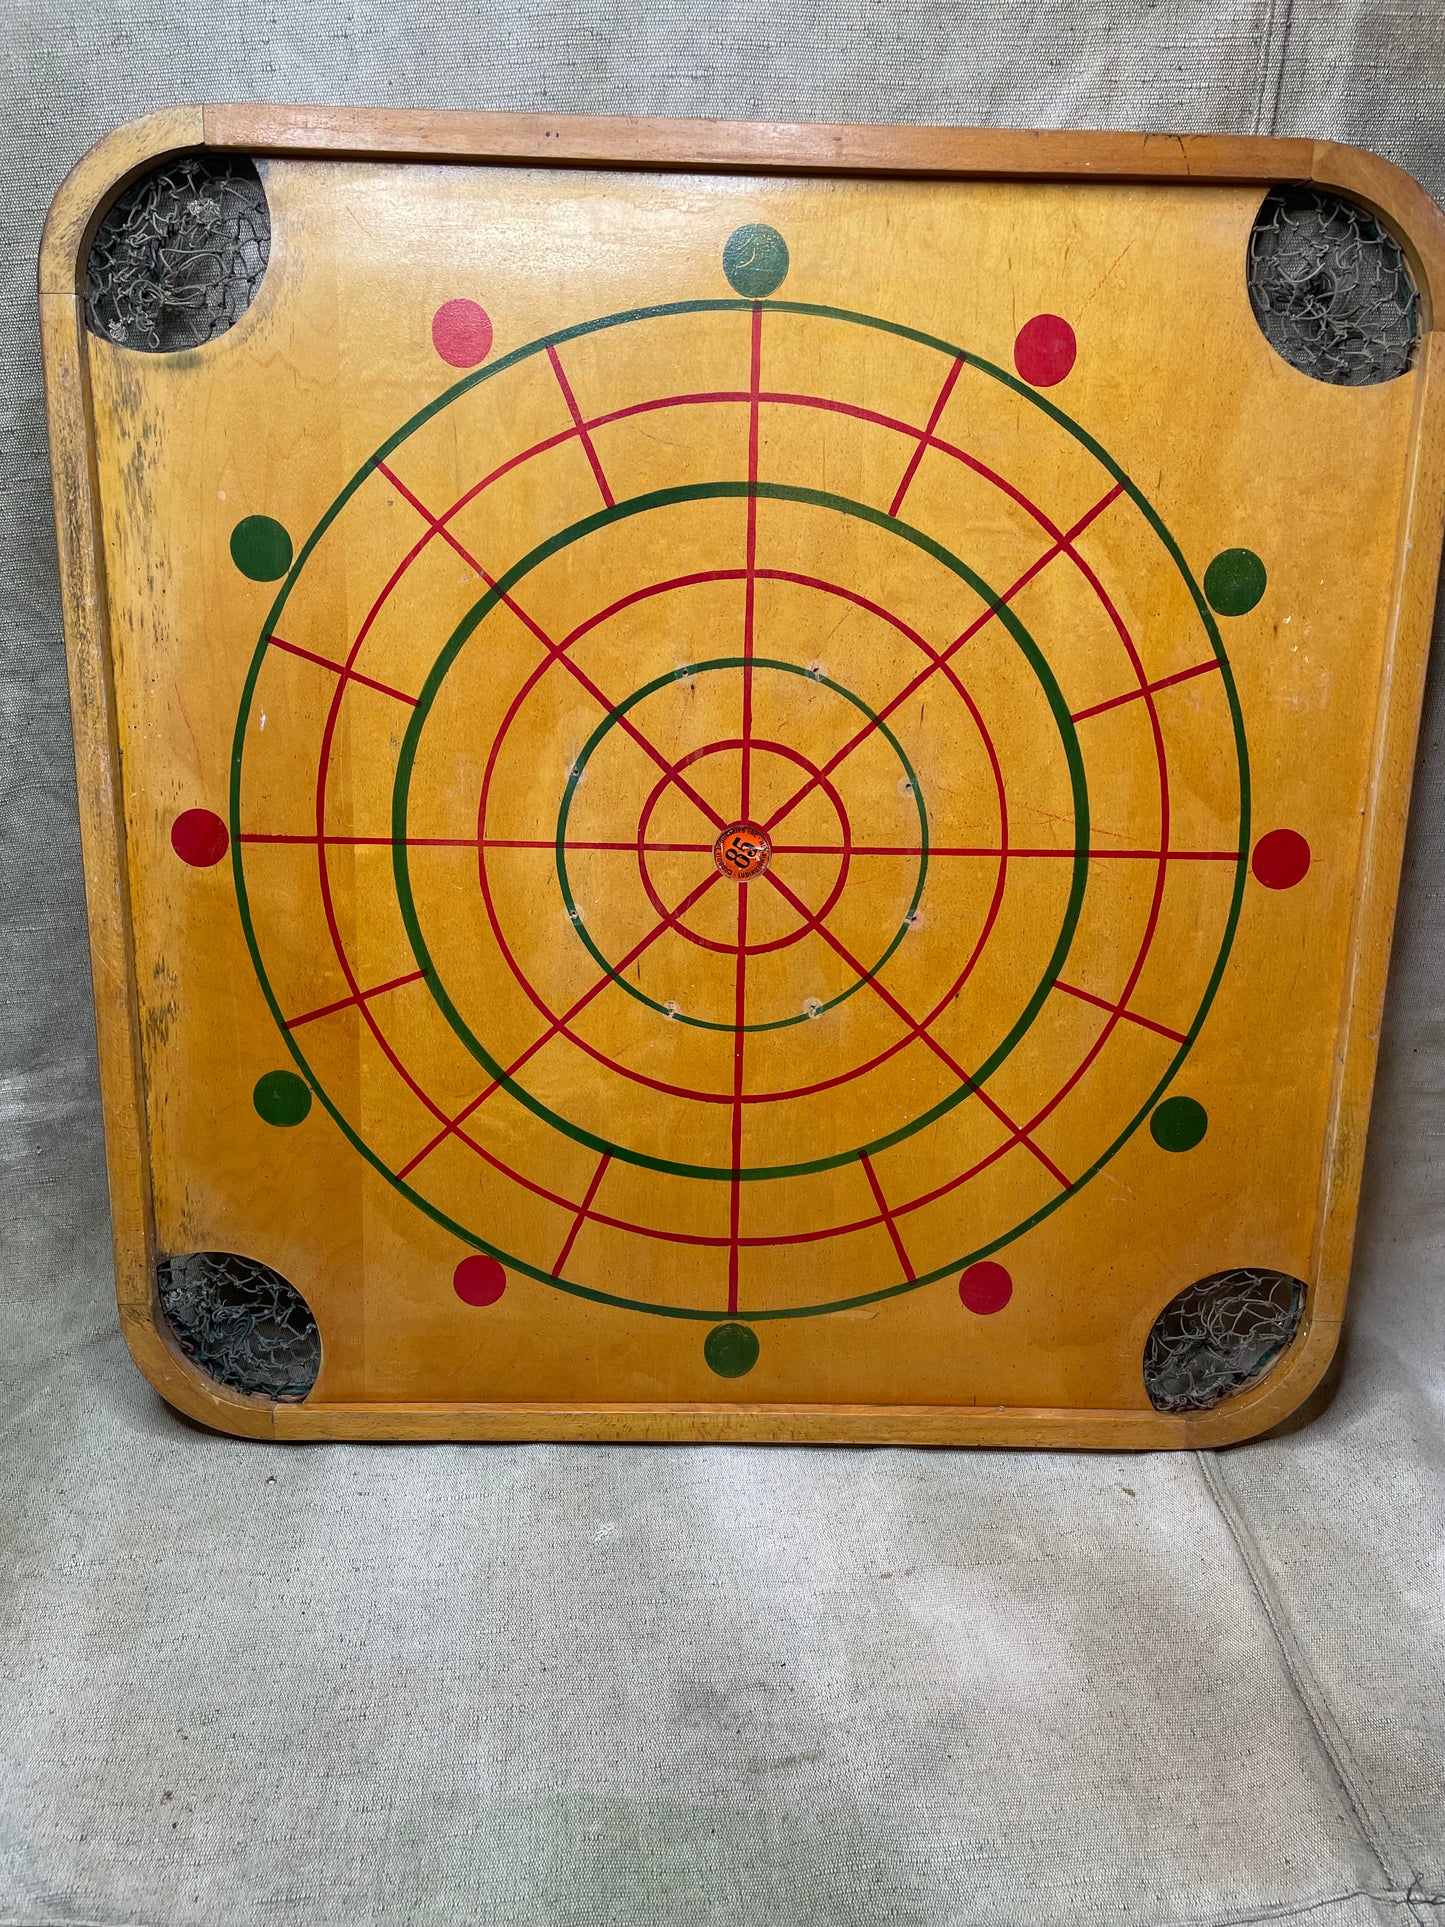 Vintage 50s Wood Carrom Board Wall Hanging Decor